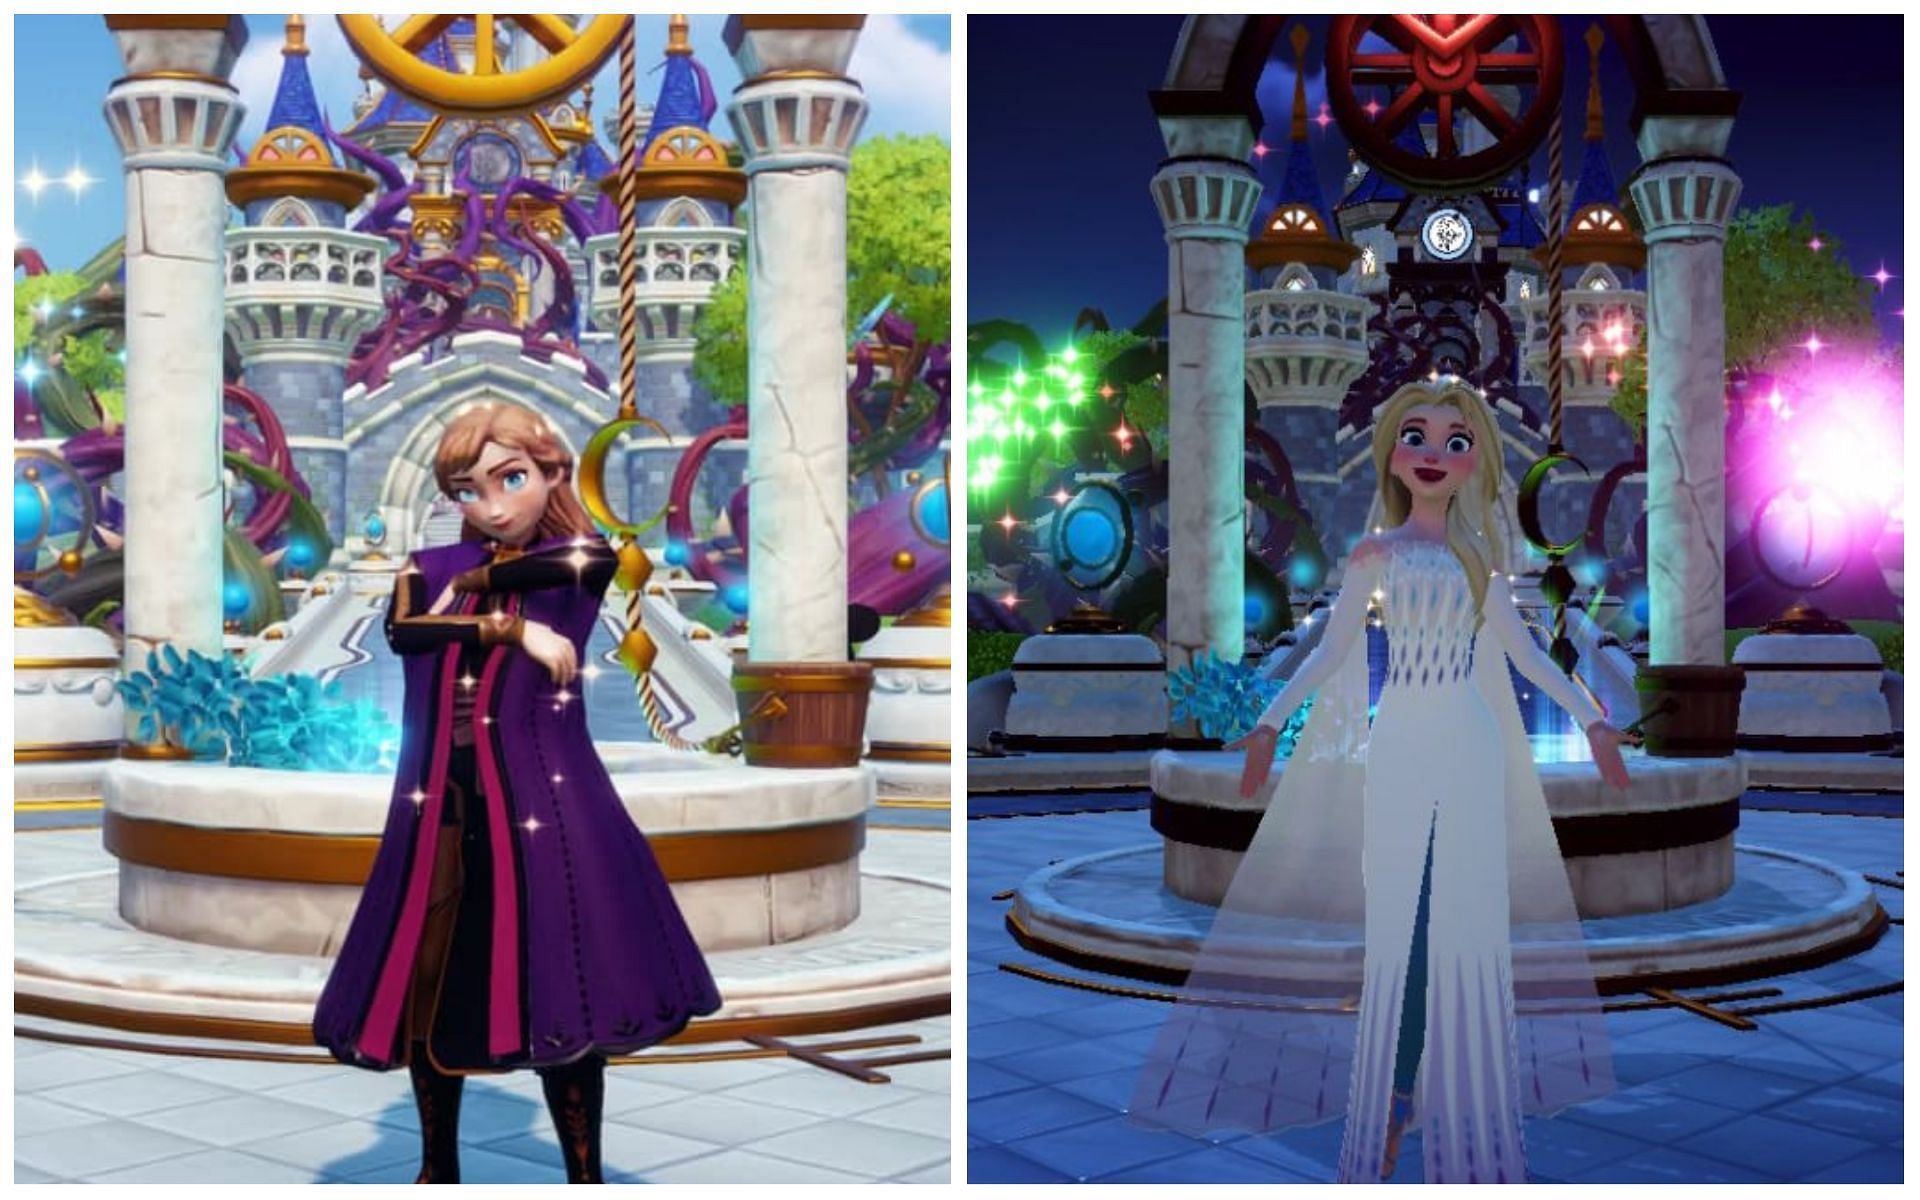 Disney Dreamlight Valley lets players interact with the popular sisters from Frozen (Image via Gameloft)